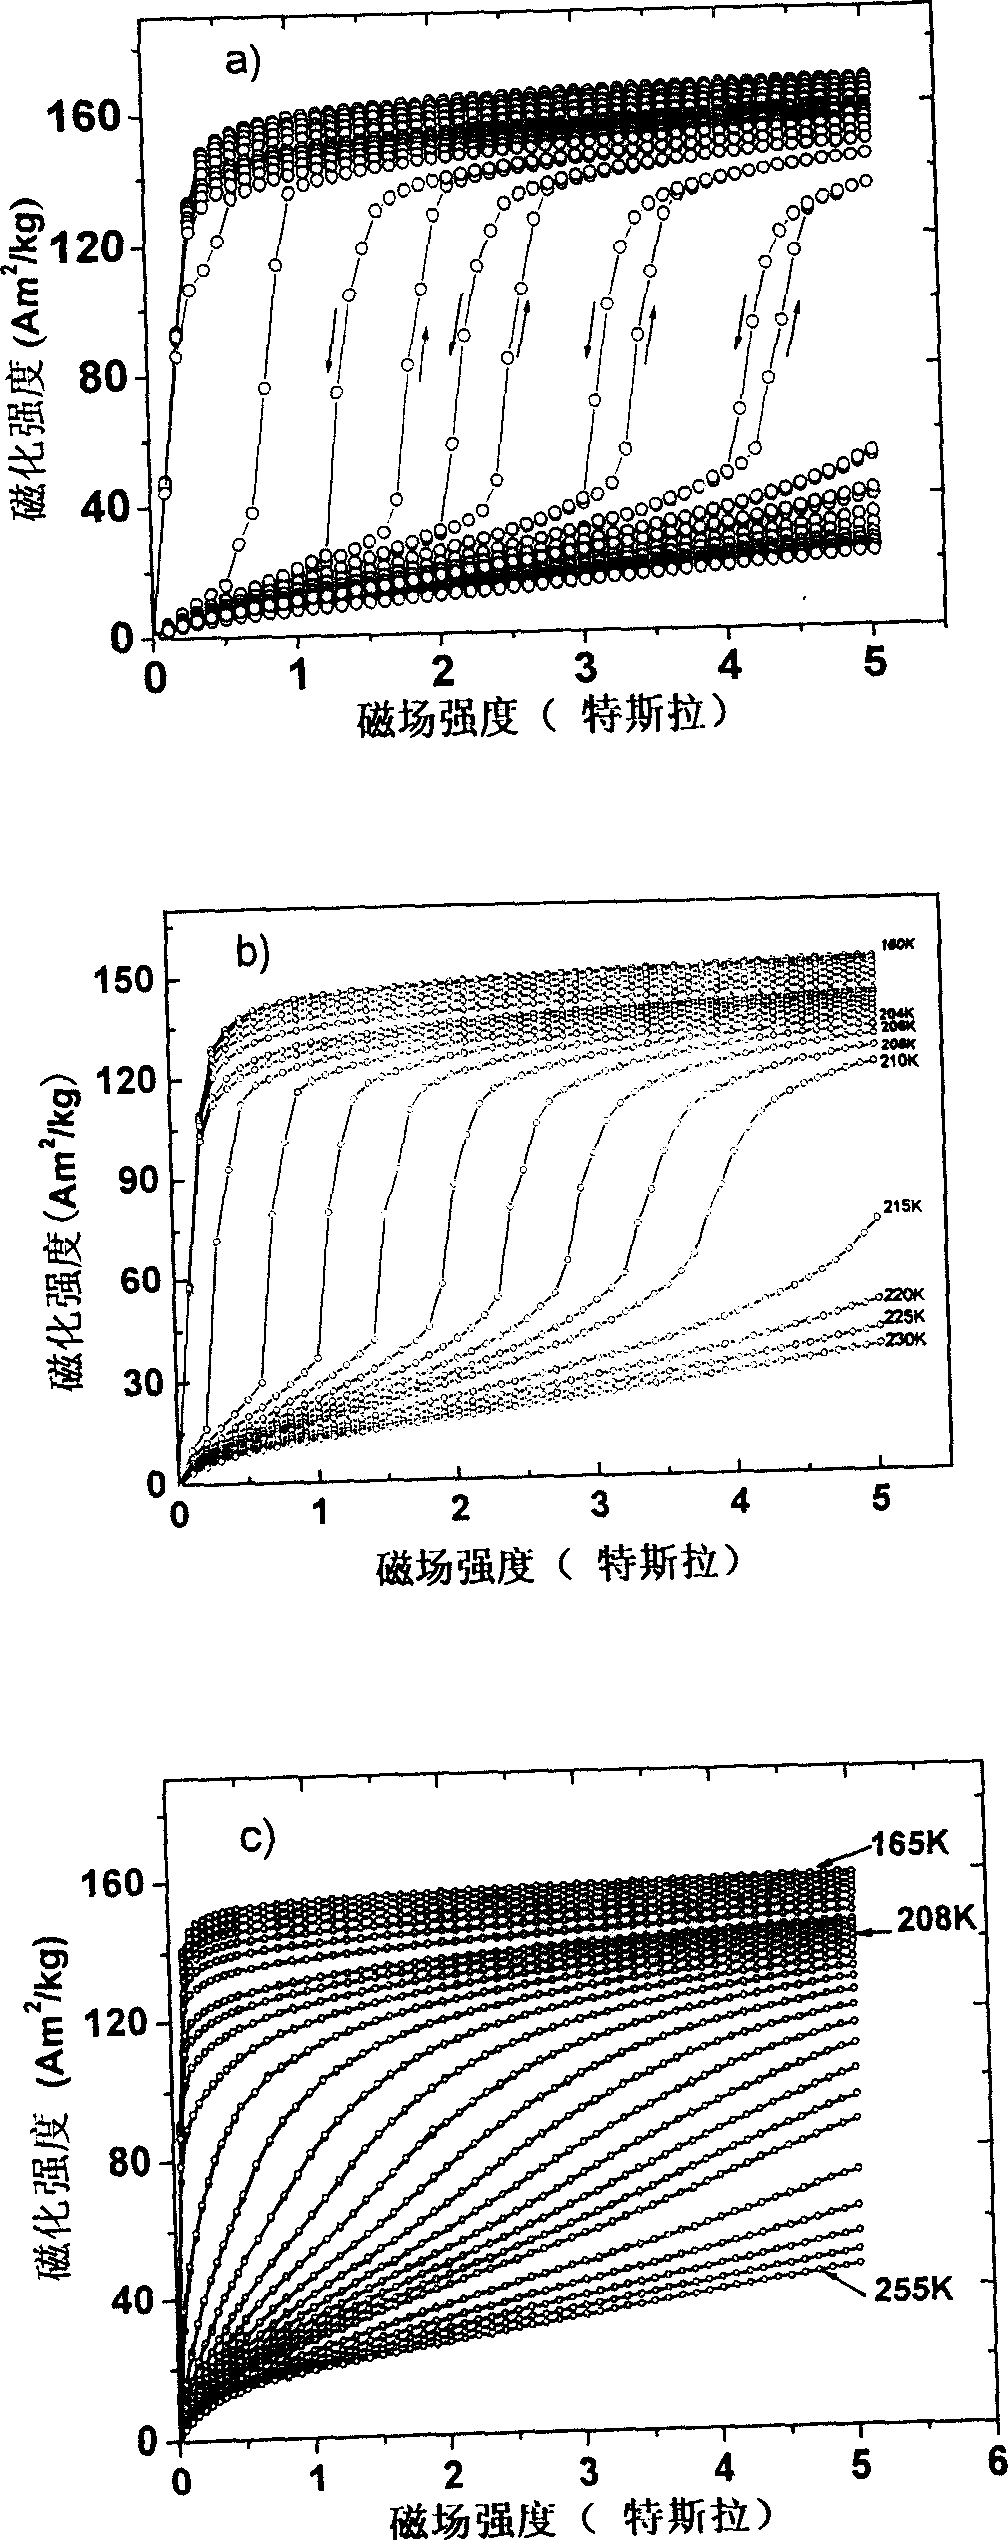 Rareearth-iron base compound magnetic refrigeration material with large magnetic entropy change and preparation process thereof